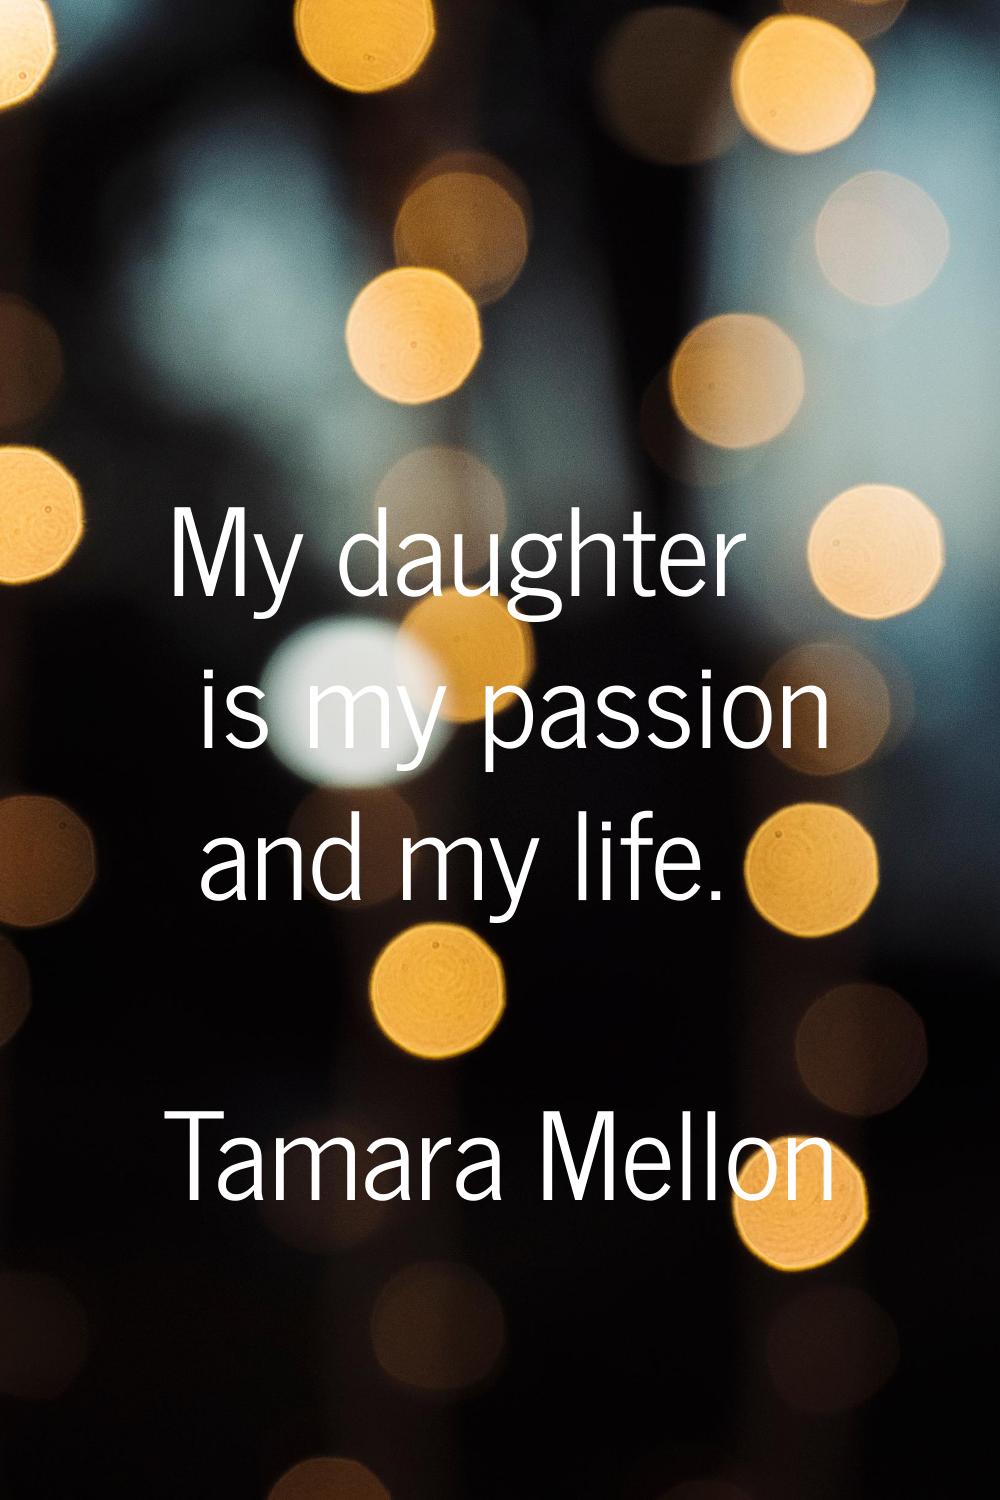 My daughter is my passion and my life.